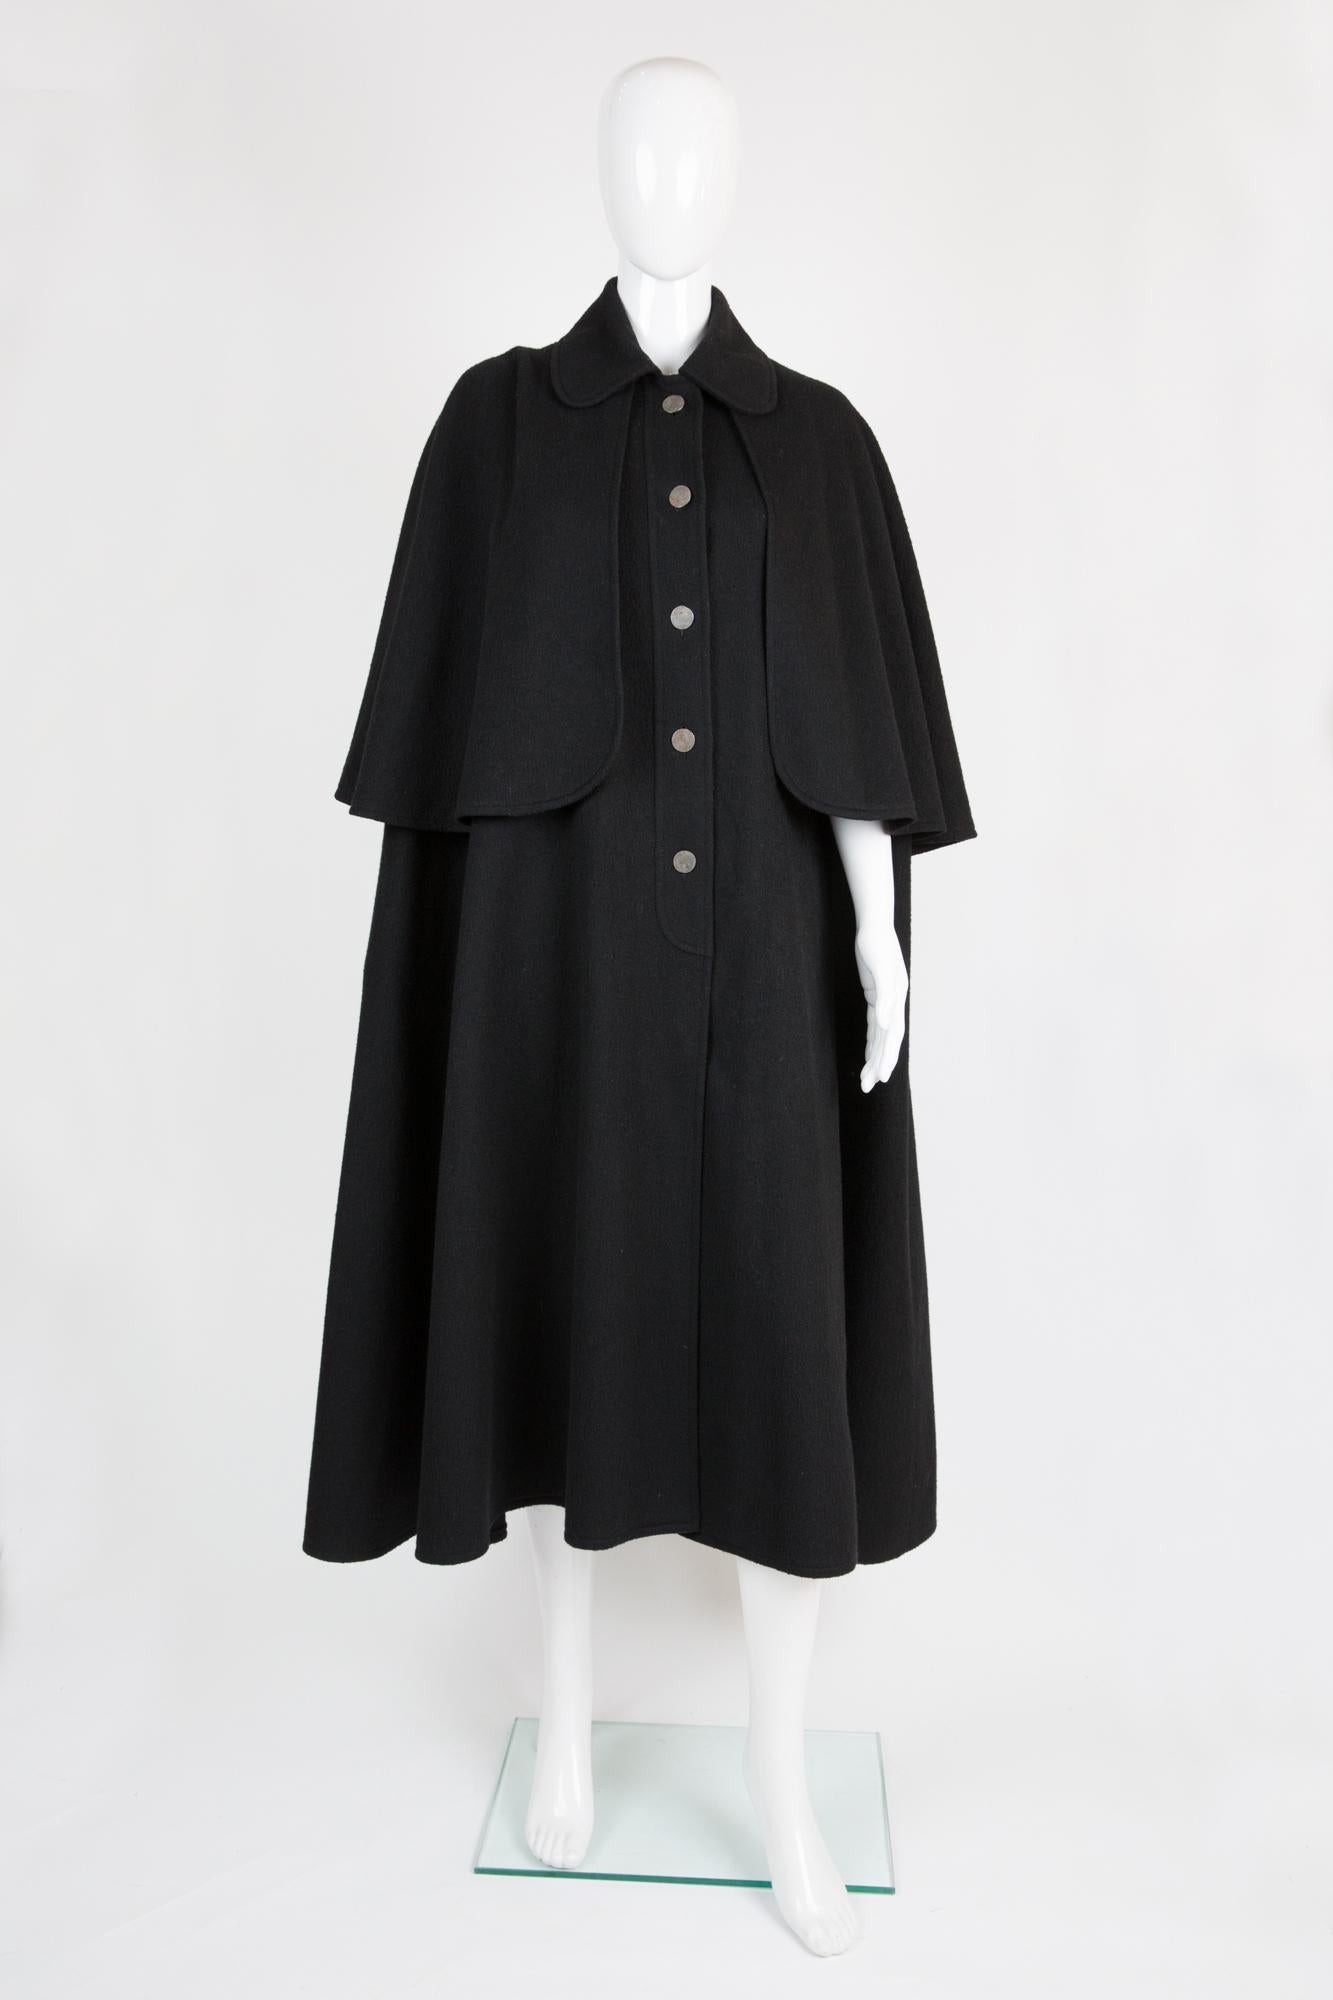 Iconic 1970s Yves Saint Laurent black wool cape coat featuring a front silver tone button opening, inside slits to pass arms..
In excellent  vintage condition. Made in France. 
Label size 38fr/US6 /UK10
We guarantee you will receive this gorgeous